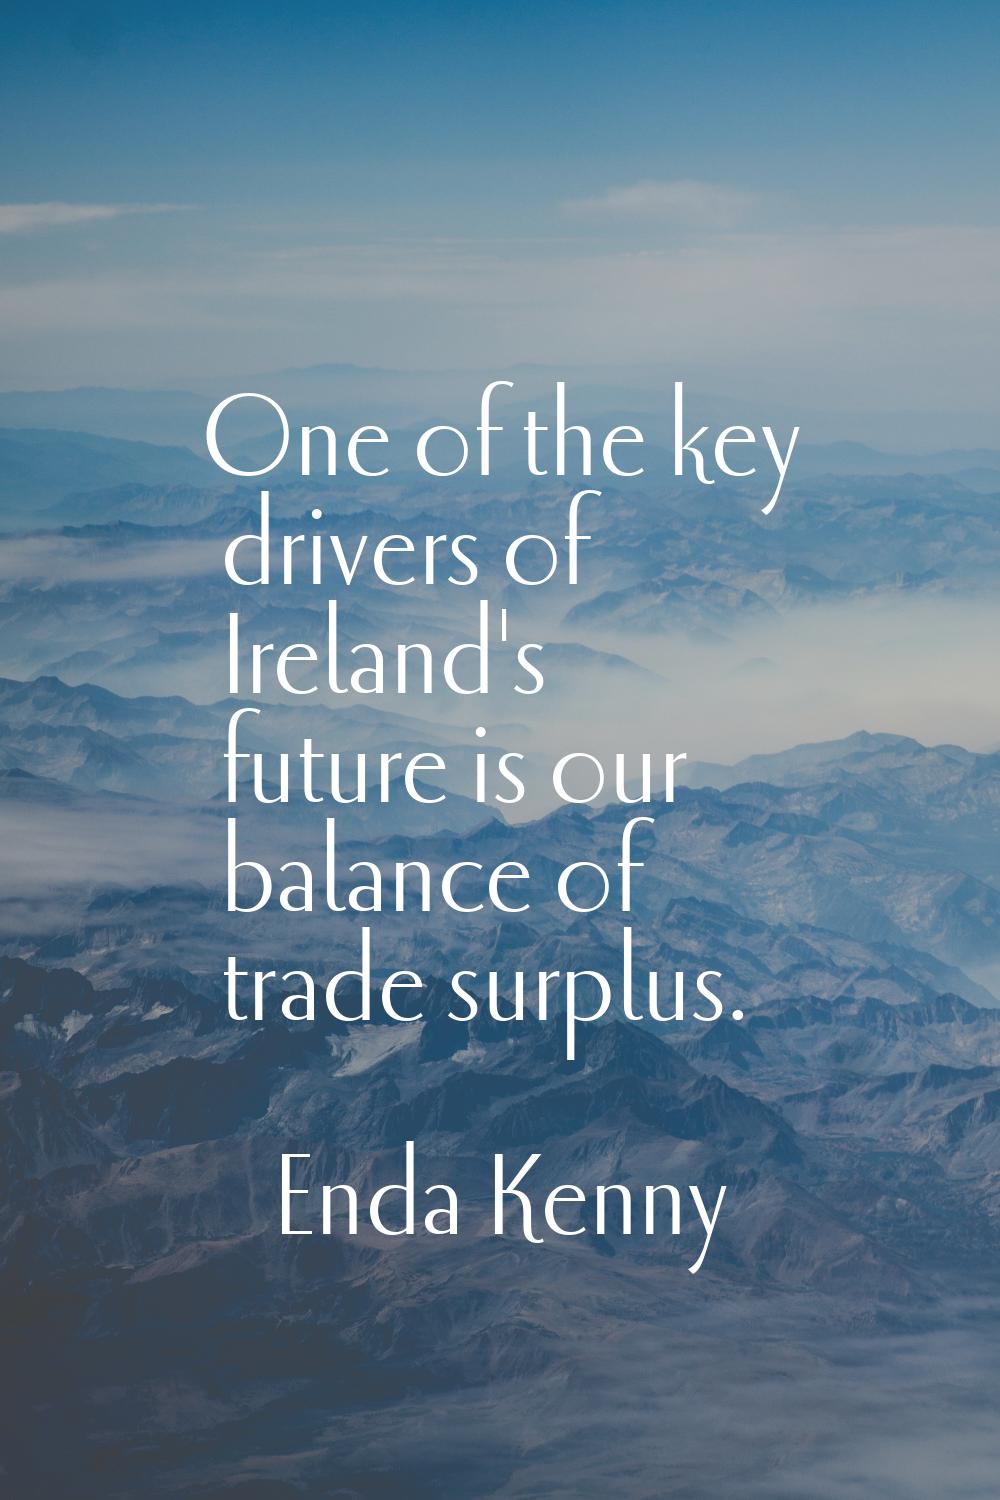 One of the key drivers of Ireland's future is our balance of trade surplus.